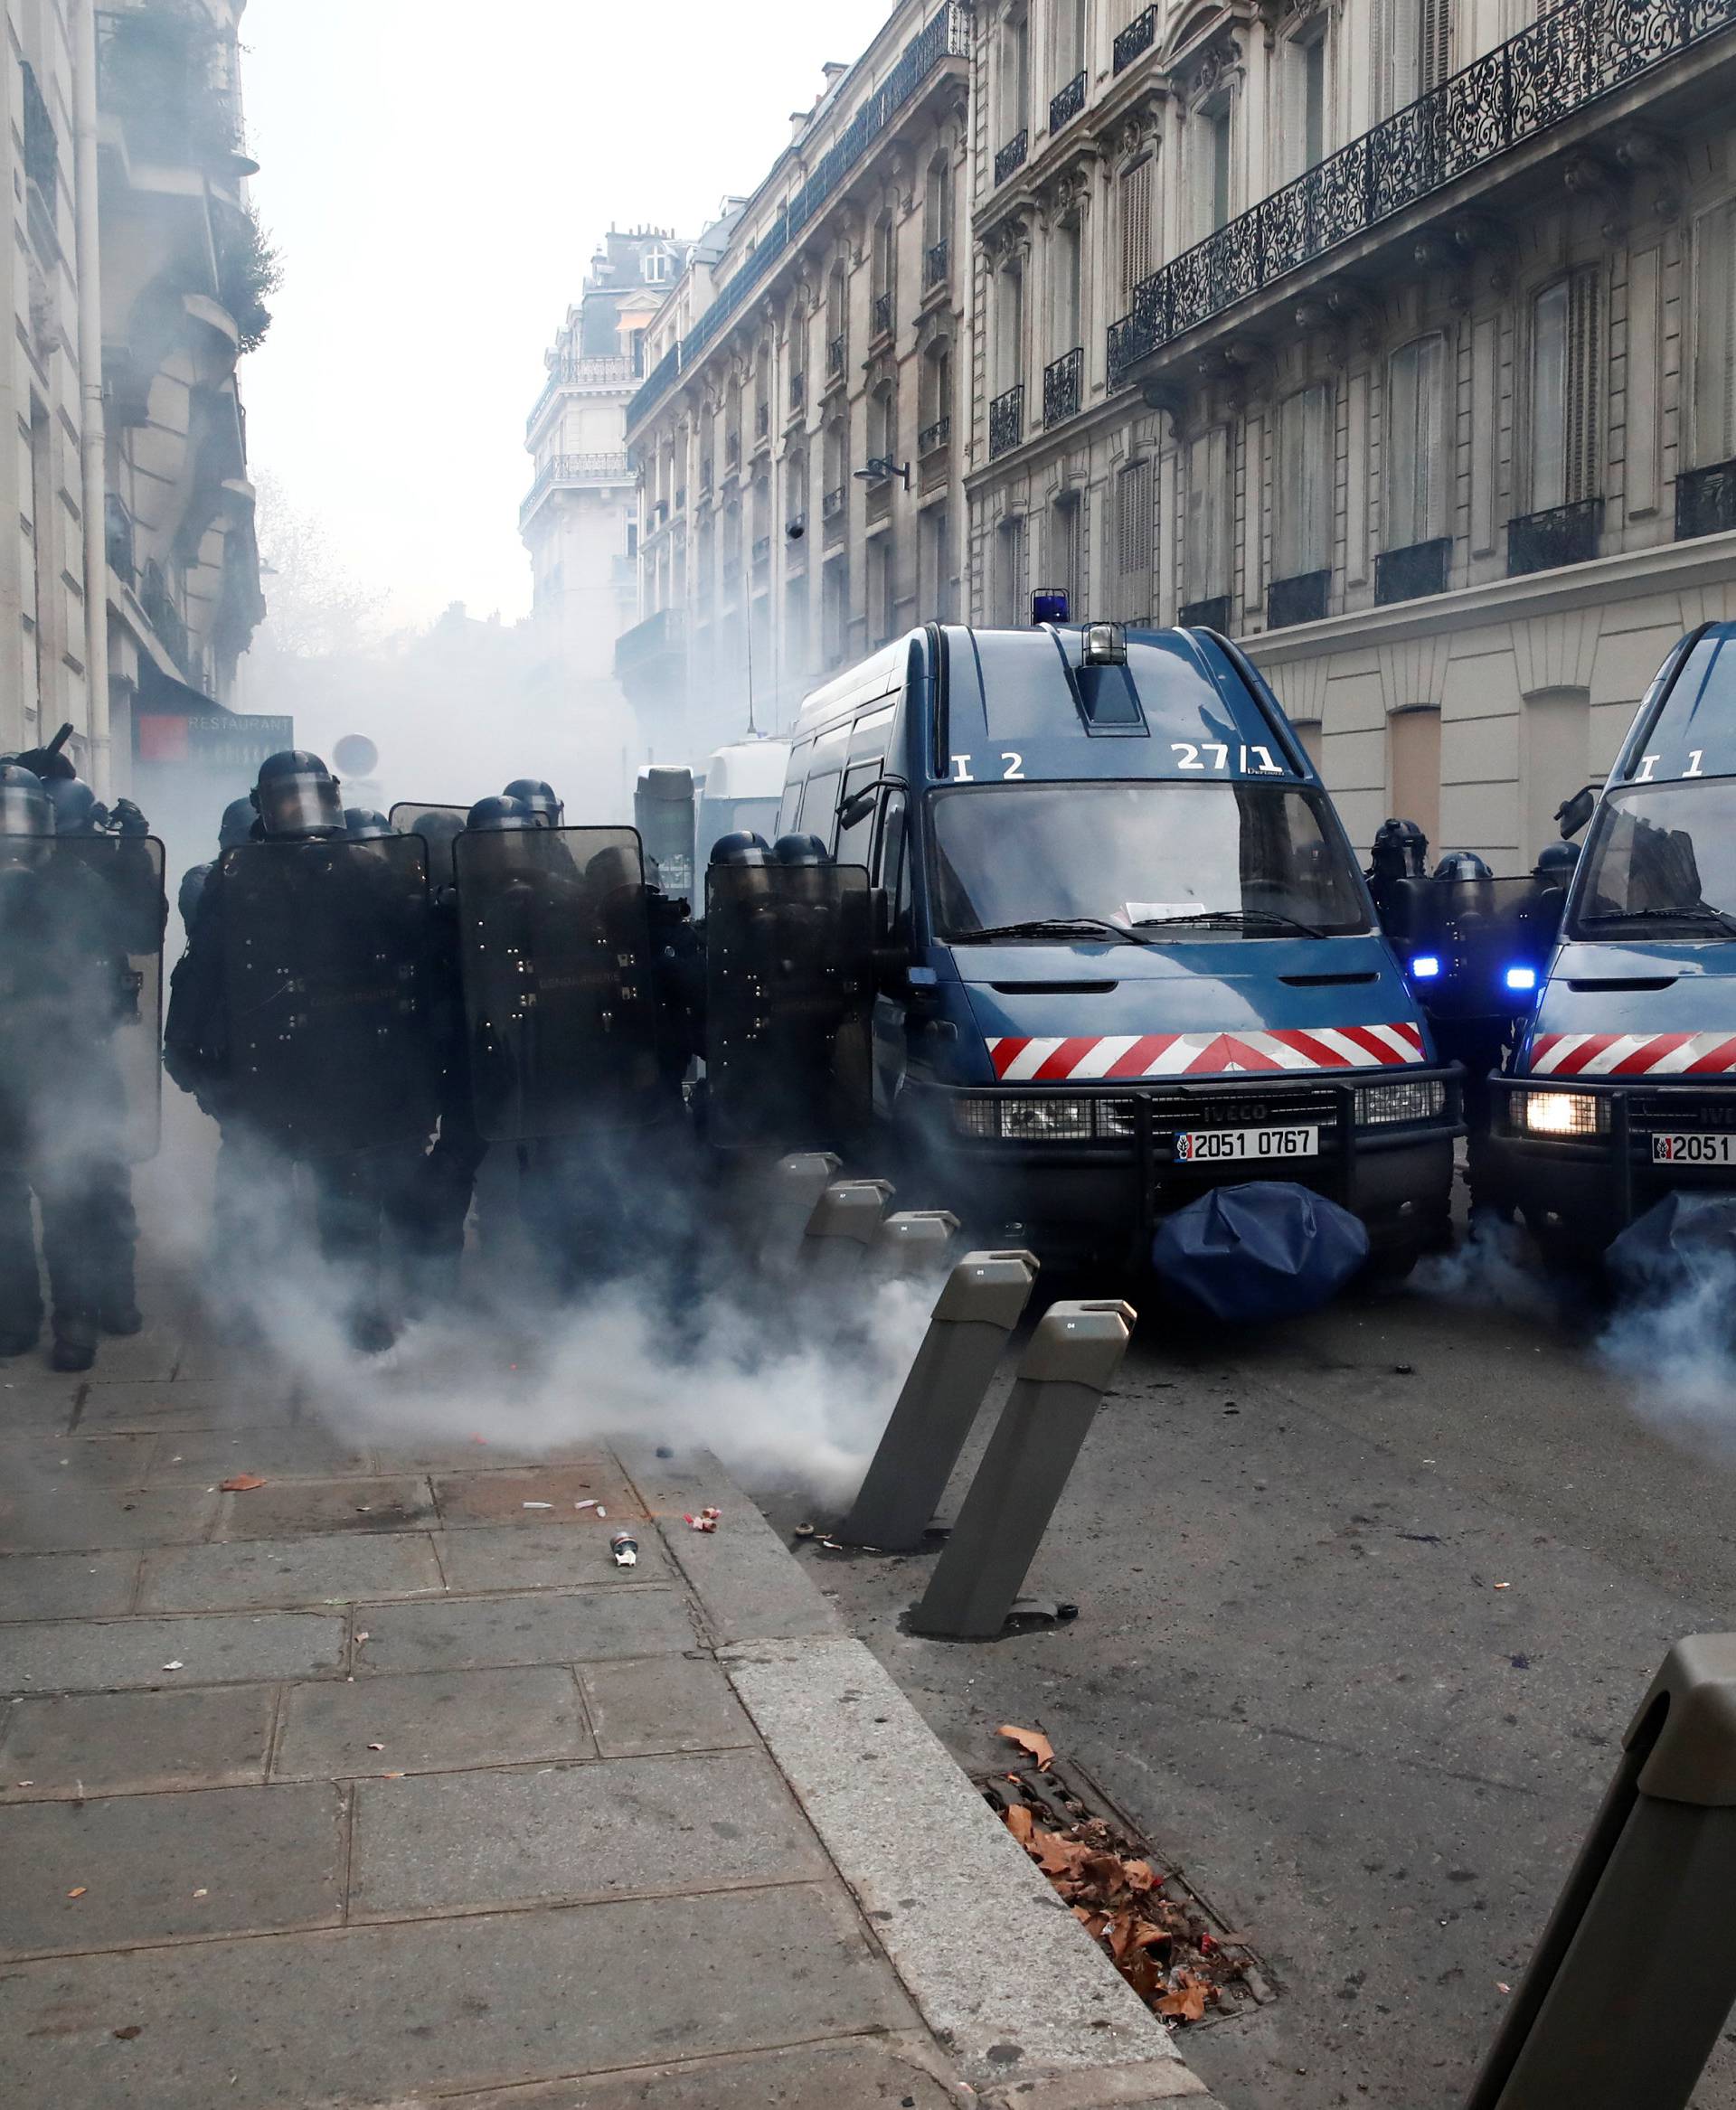 Tear gas floats in the air around French gendarmes who secure a street during a national day of protest by the "yellow vests" movement in Paris